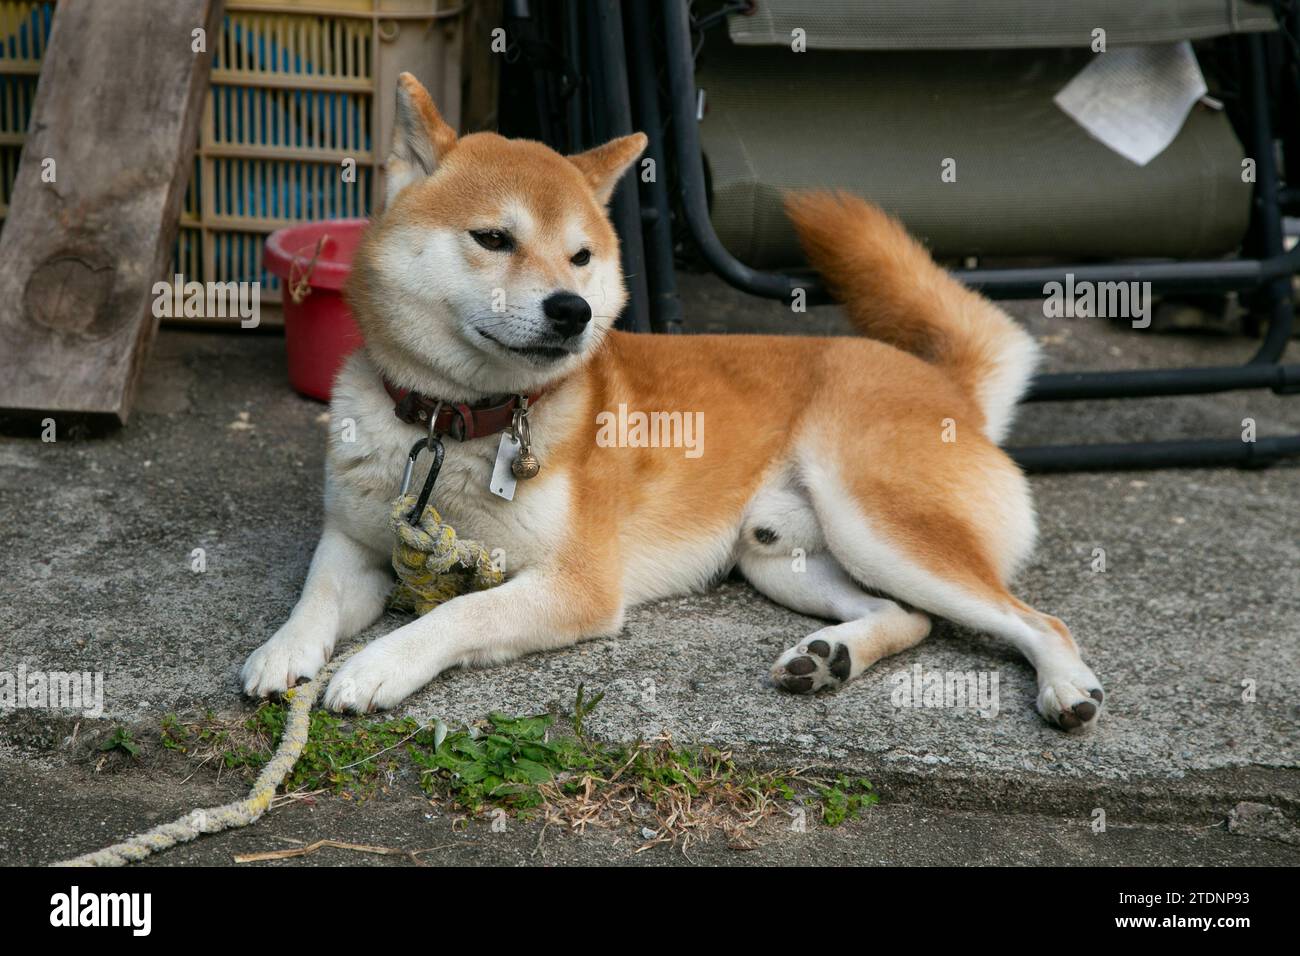 The shiba inu (柴犬, shiba inu) is a small and agile breed of dog, originally from Japan, which was originally bred and developed as a hunting dog. Stock Photo